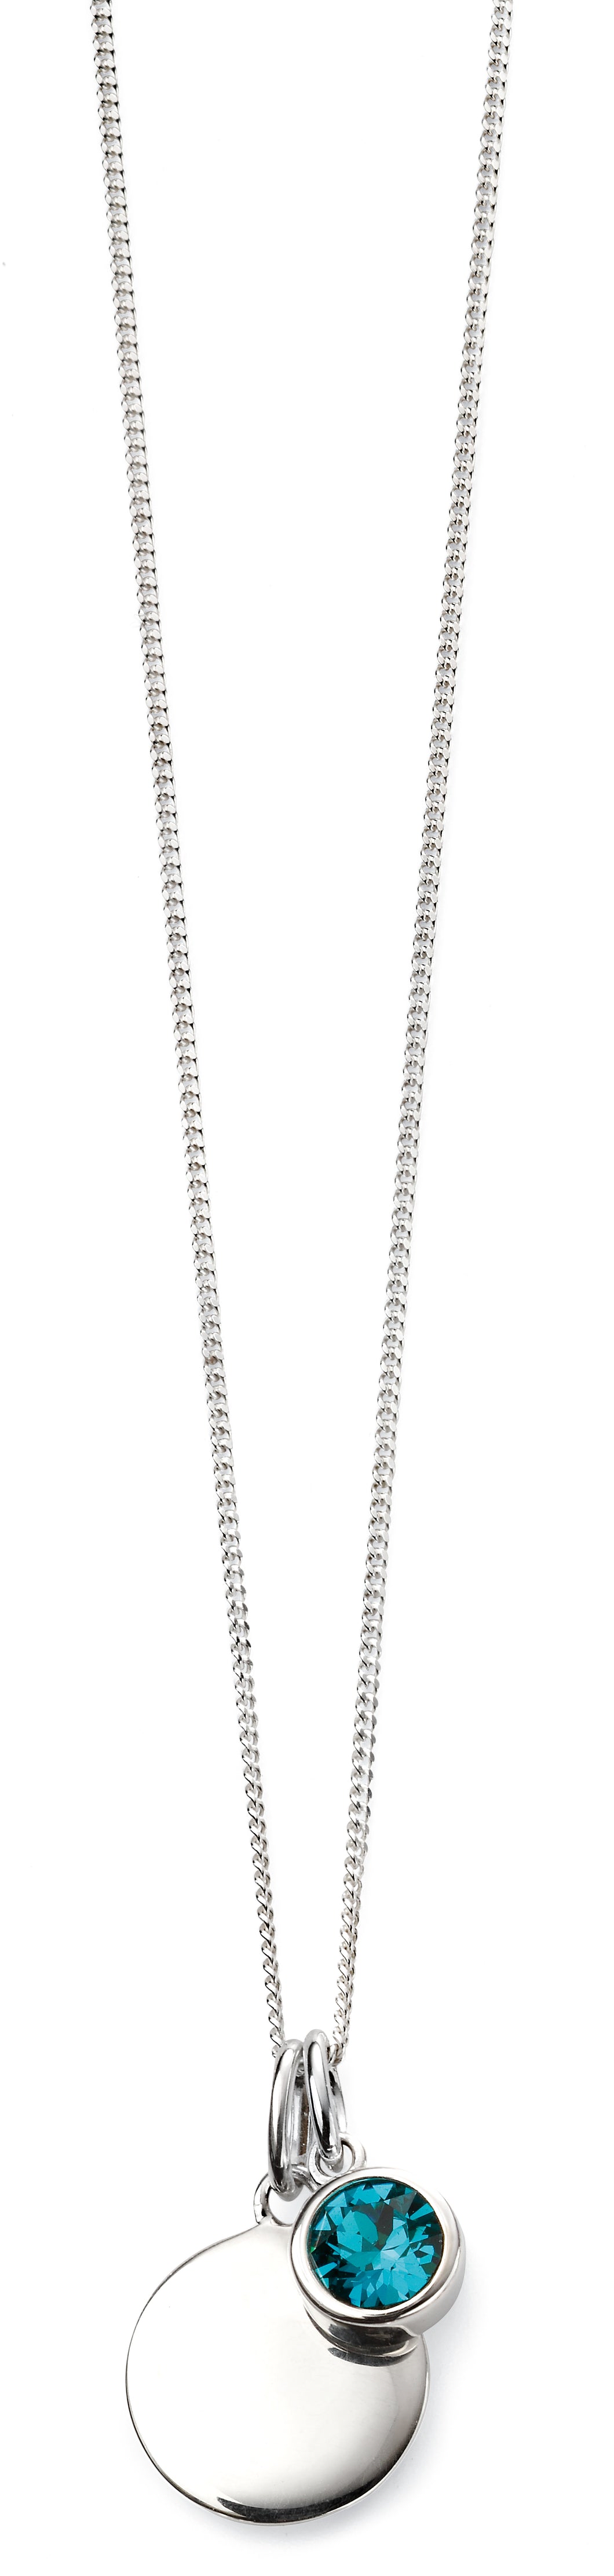 December Crystal Birthstone Pendant On Chain With Engravable Disc